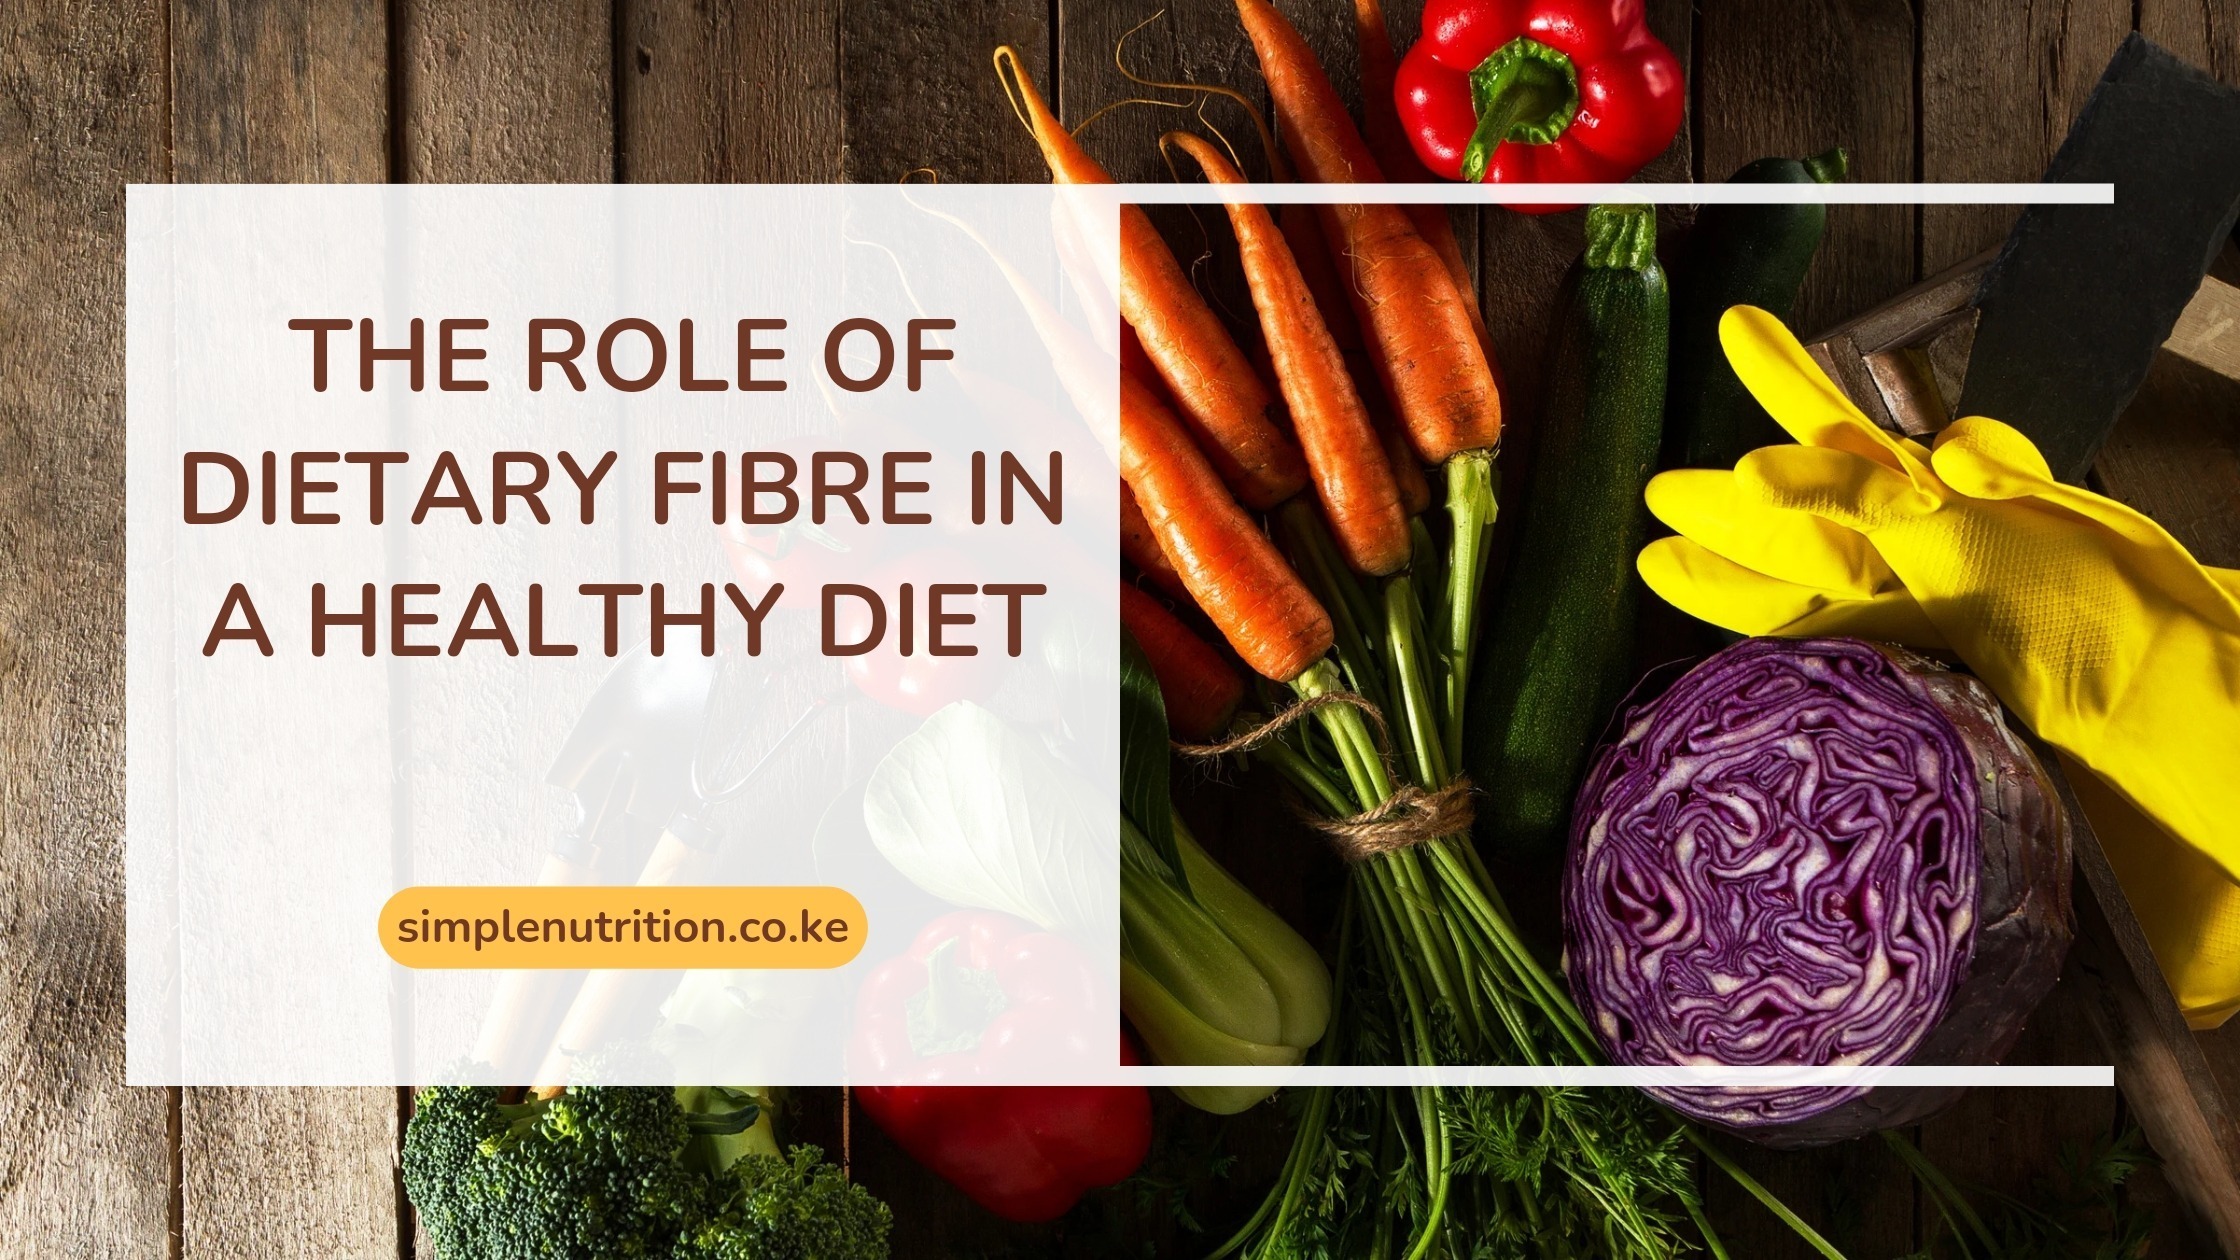 What is the role of Dietary fibre in a Healthy diet?